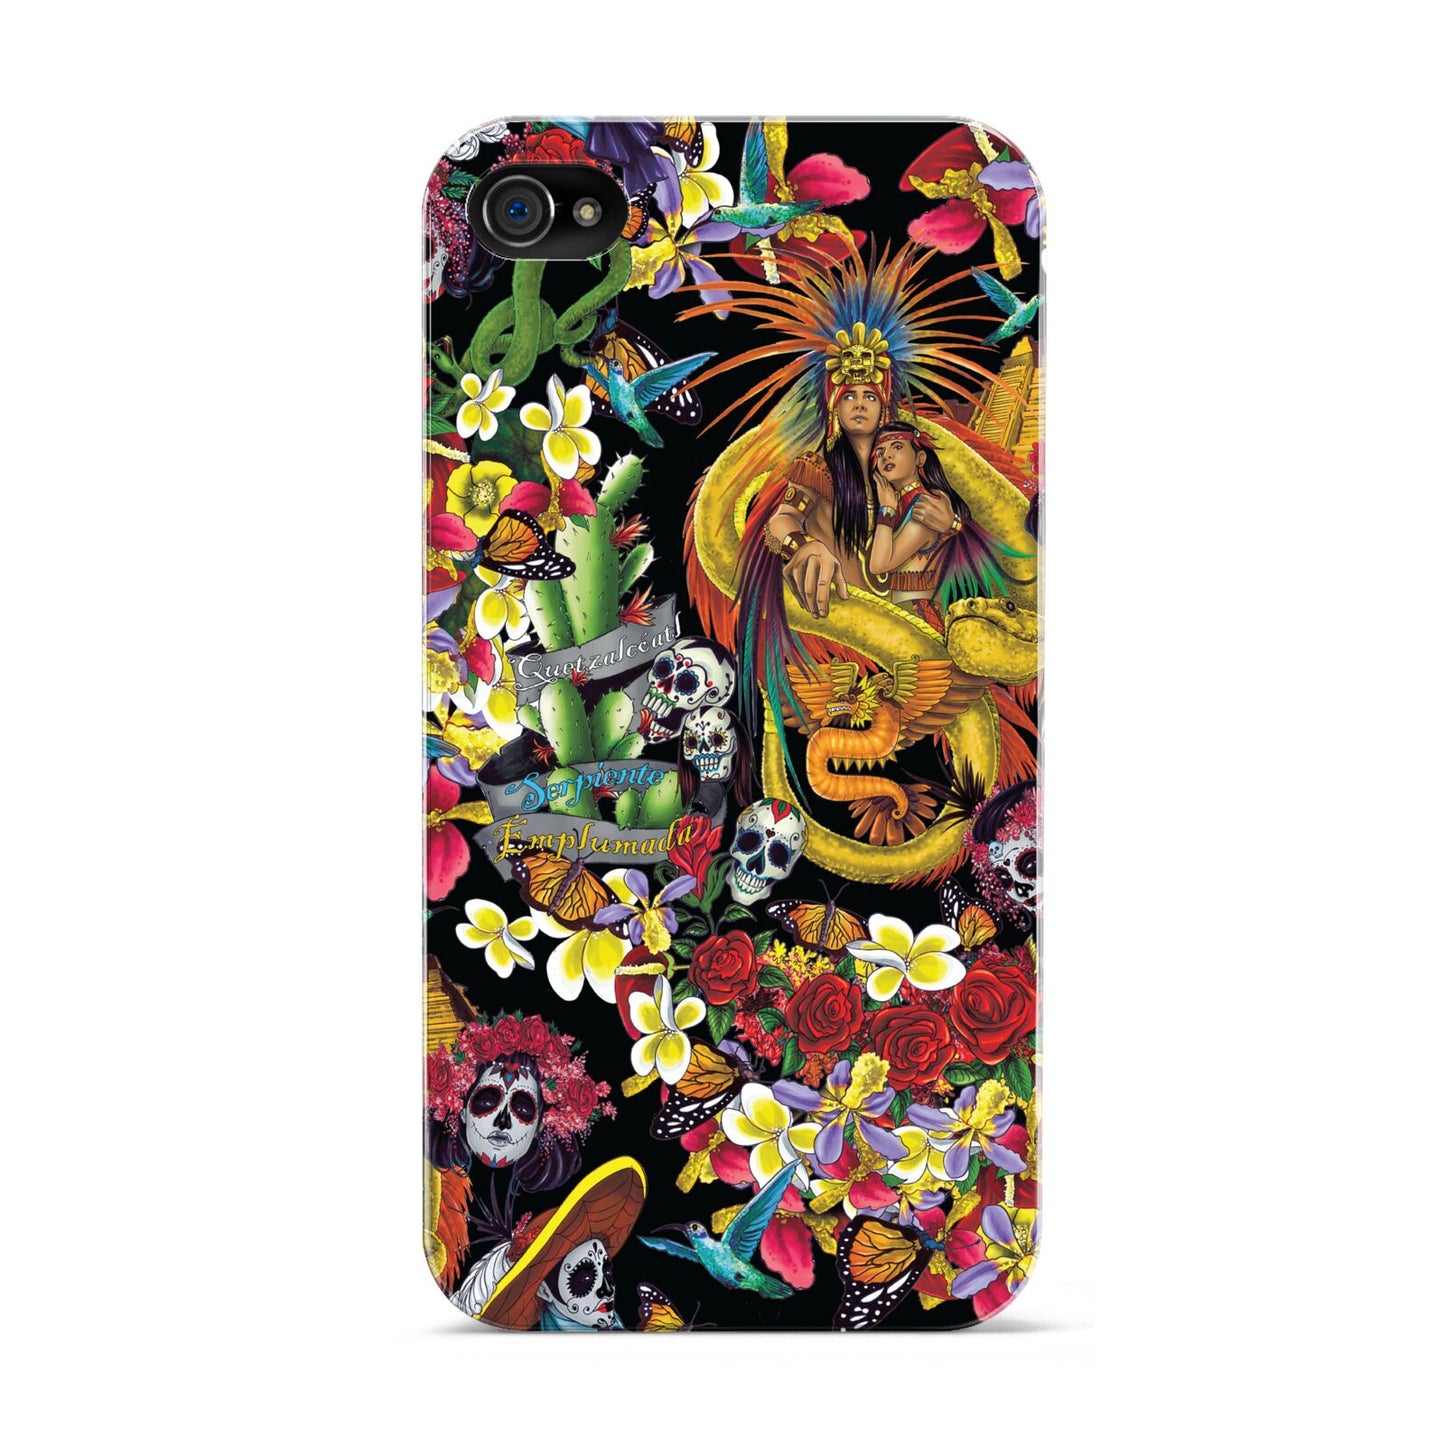 Day of the Dead Apple iPhone 4s Case